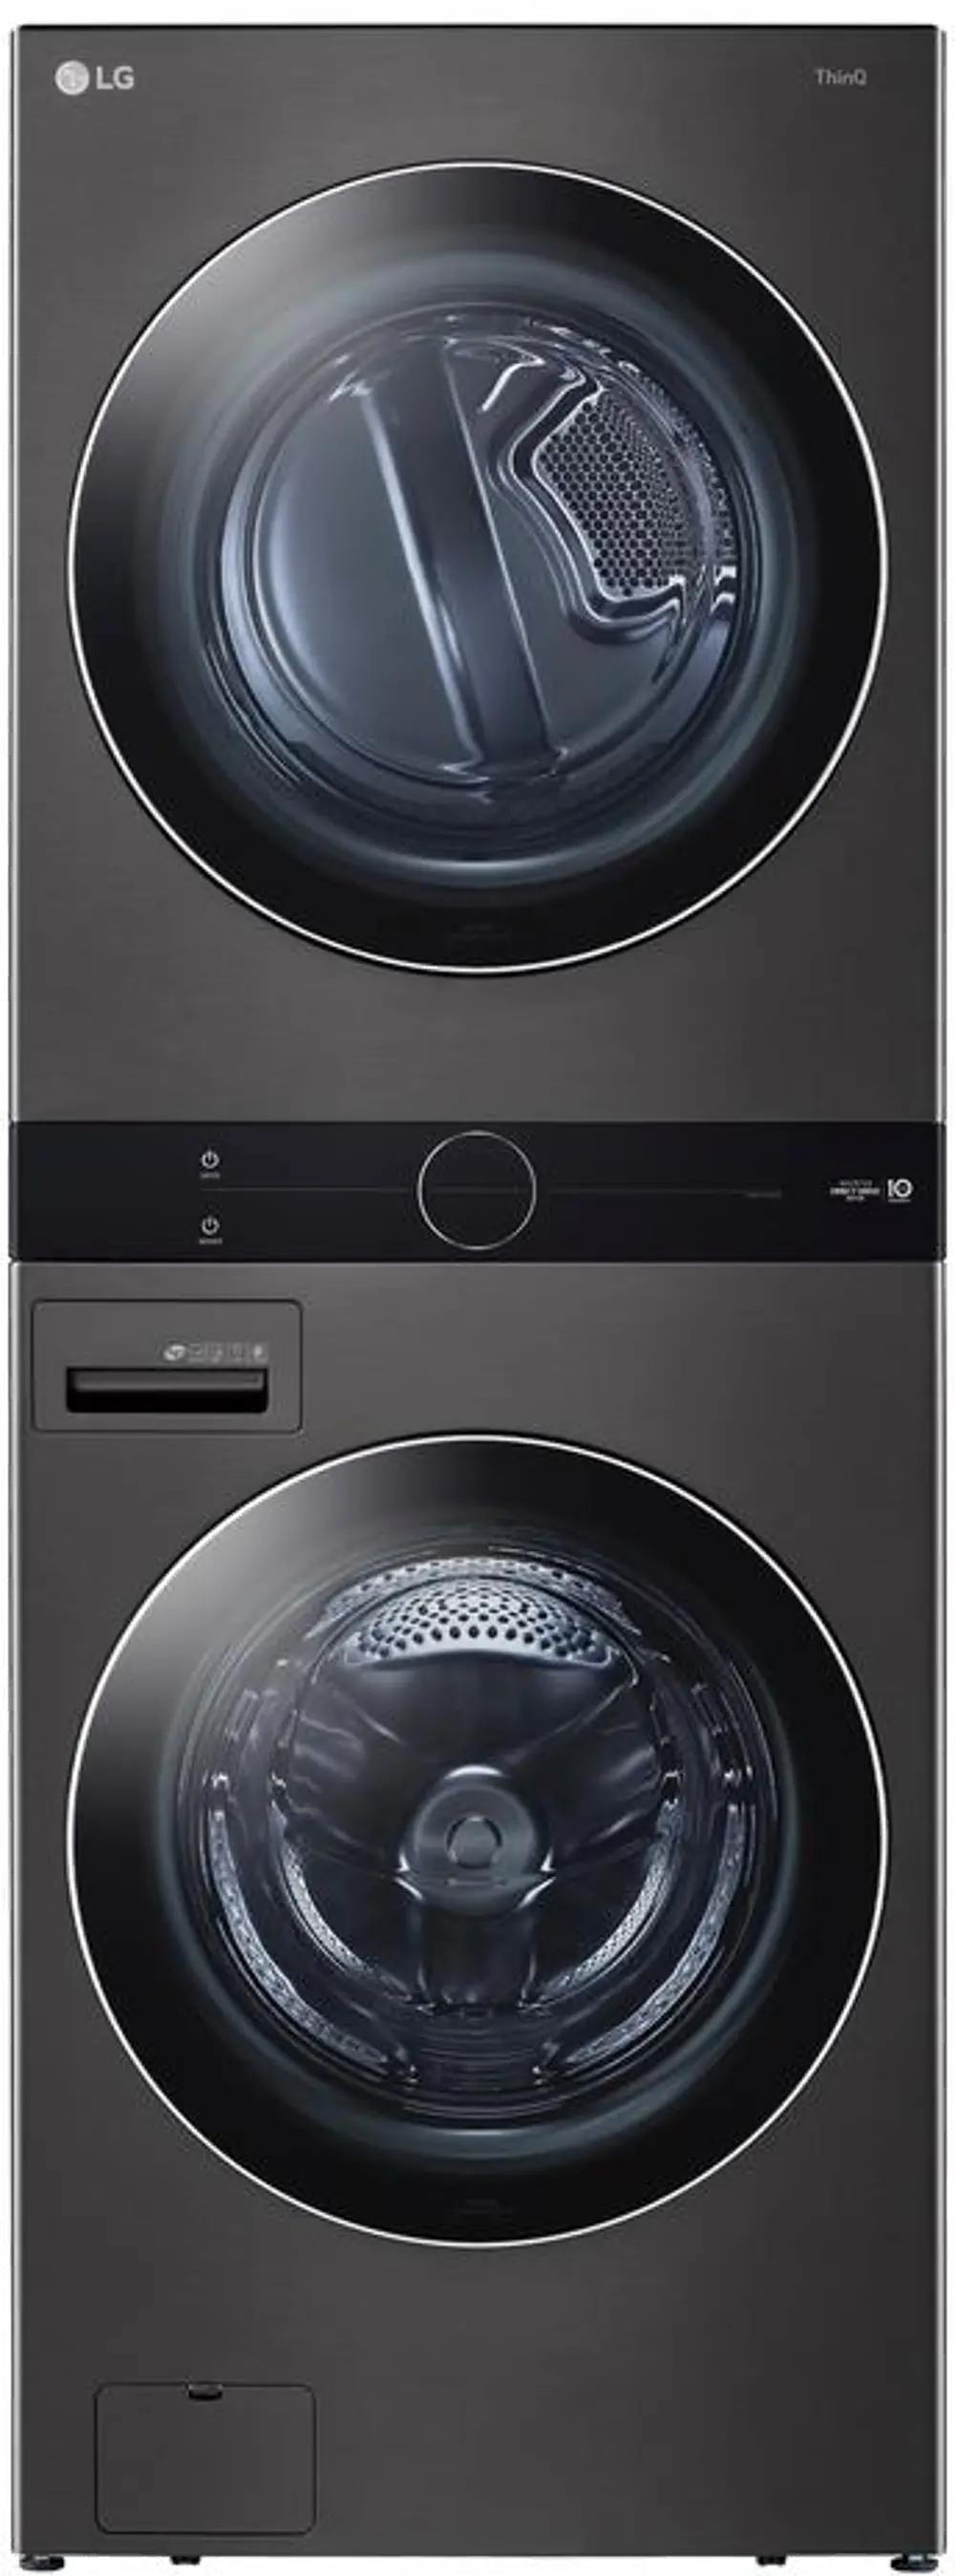 WKGX201HBA LG Single Unit Front Load LG WashTower with Center Control 4.5 cu. ft. Washer and 7.4 cu. ft. Gas Dryer - Black Steel-1